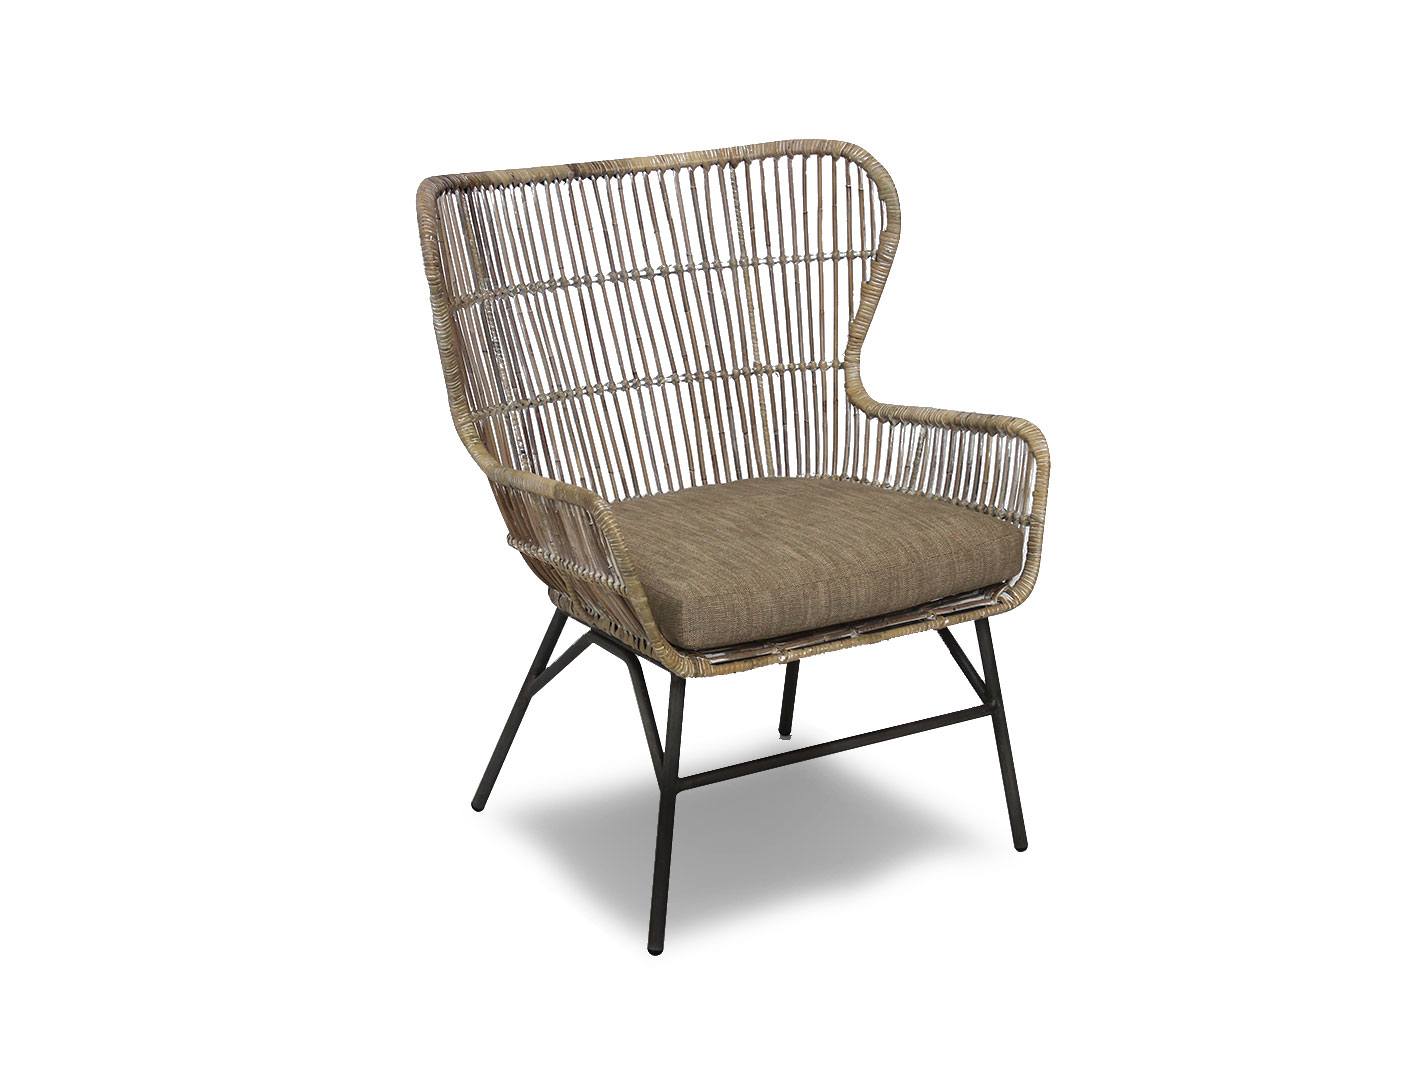 BALI OCCASIONAL CHAIR